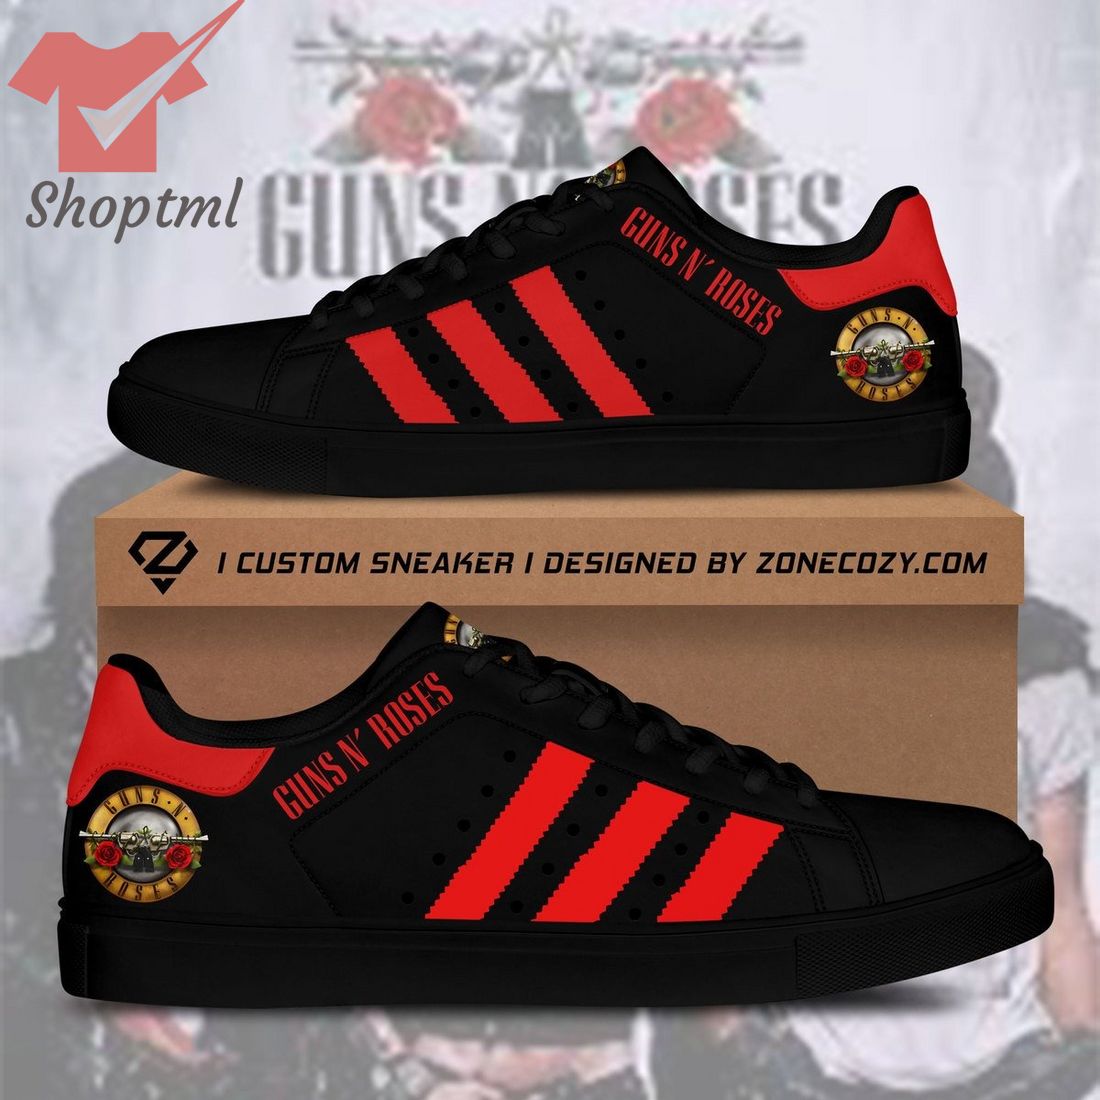 Guns N' Roses rock band red stan smith adidas shoes